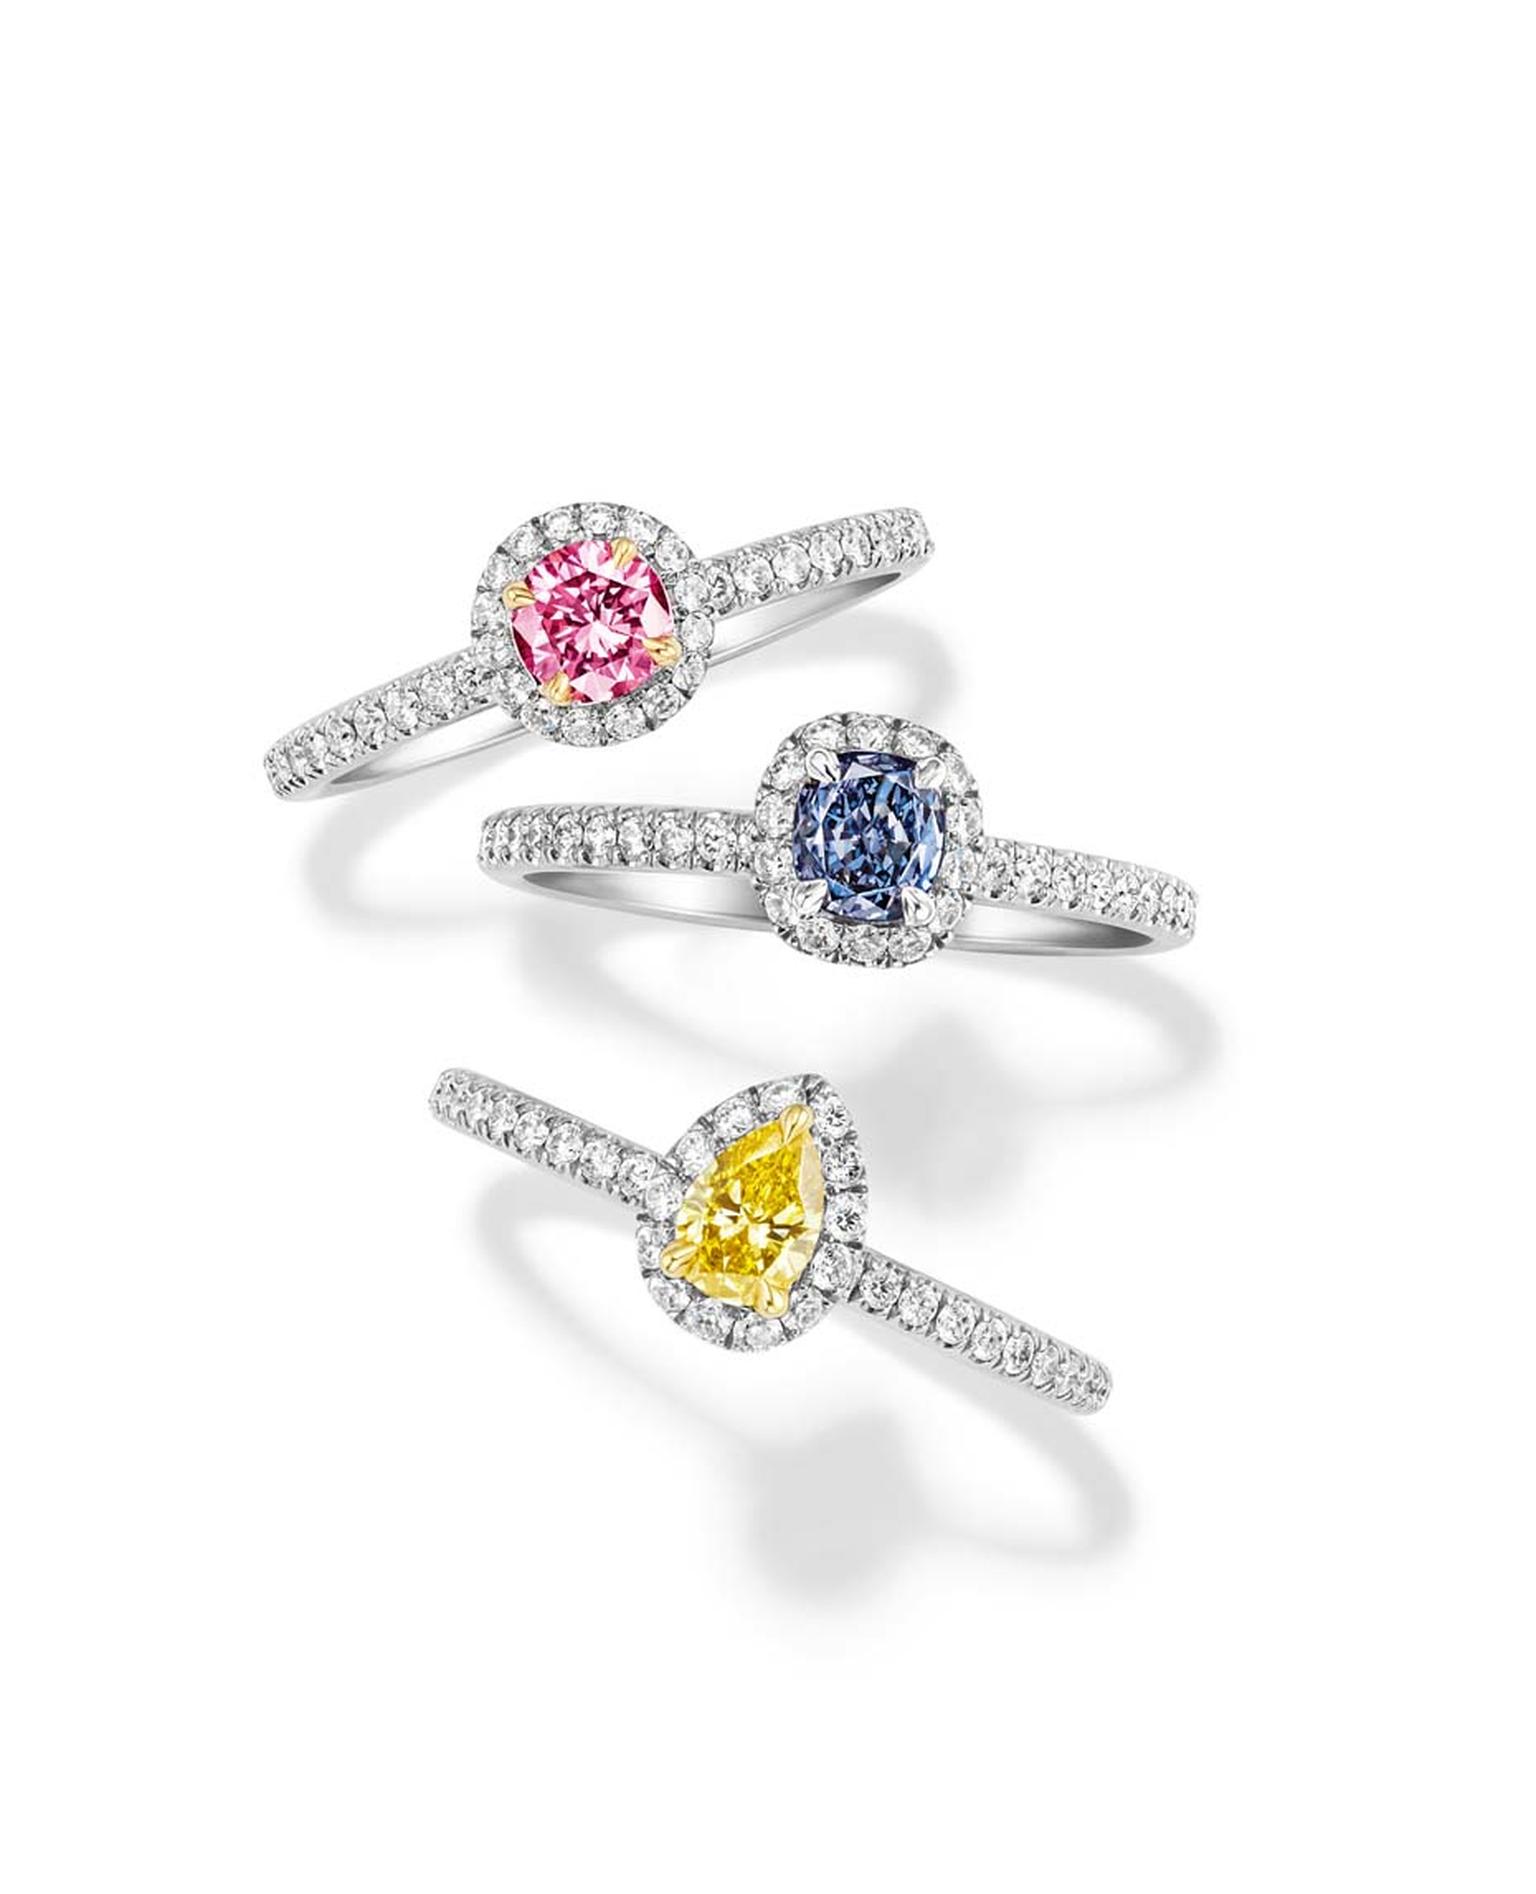 Harry Winston coloured diamond engagement rings with pavé diamonds surrounding the central diamond and band.